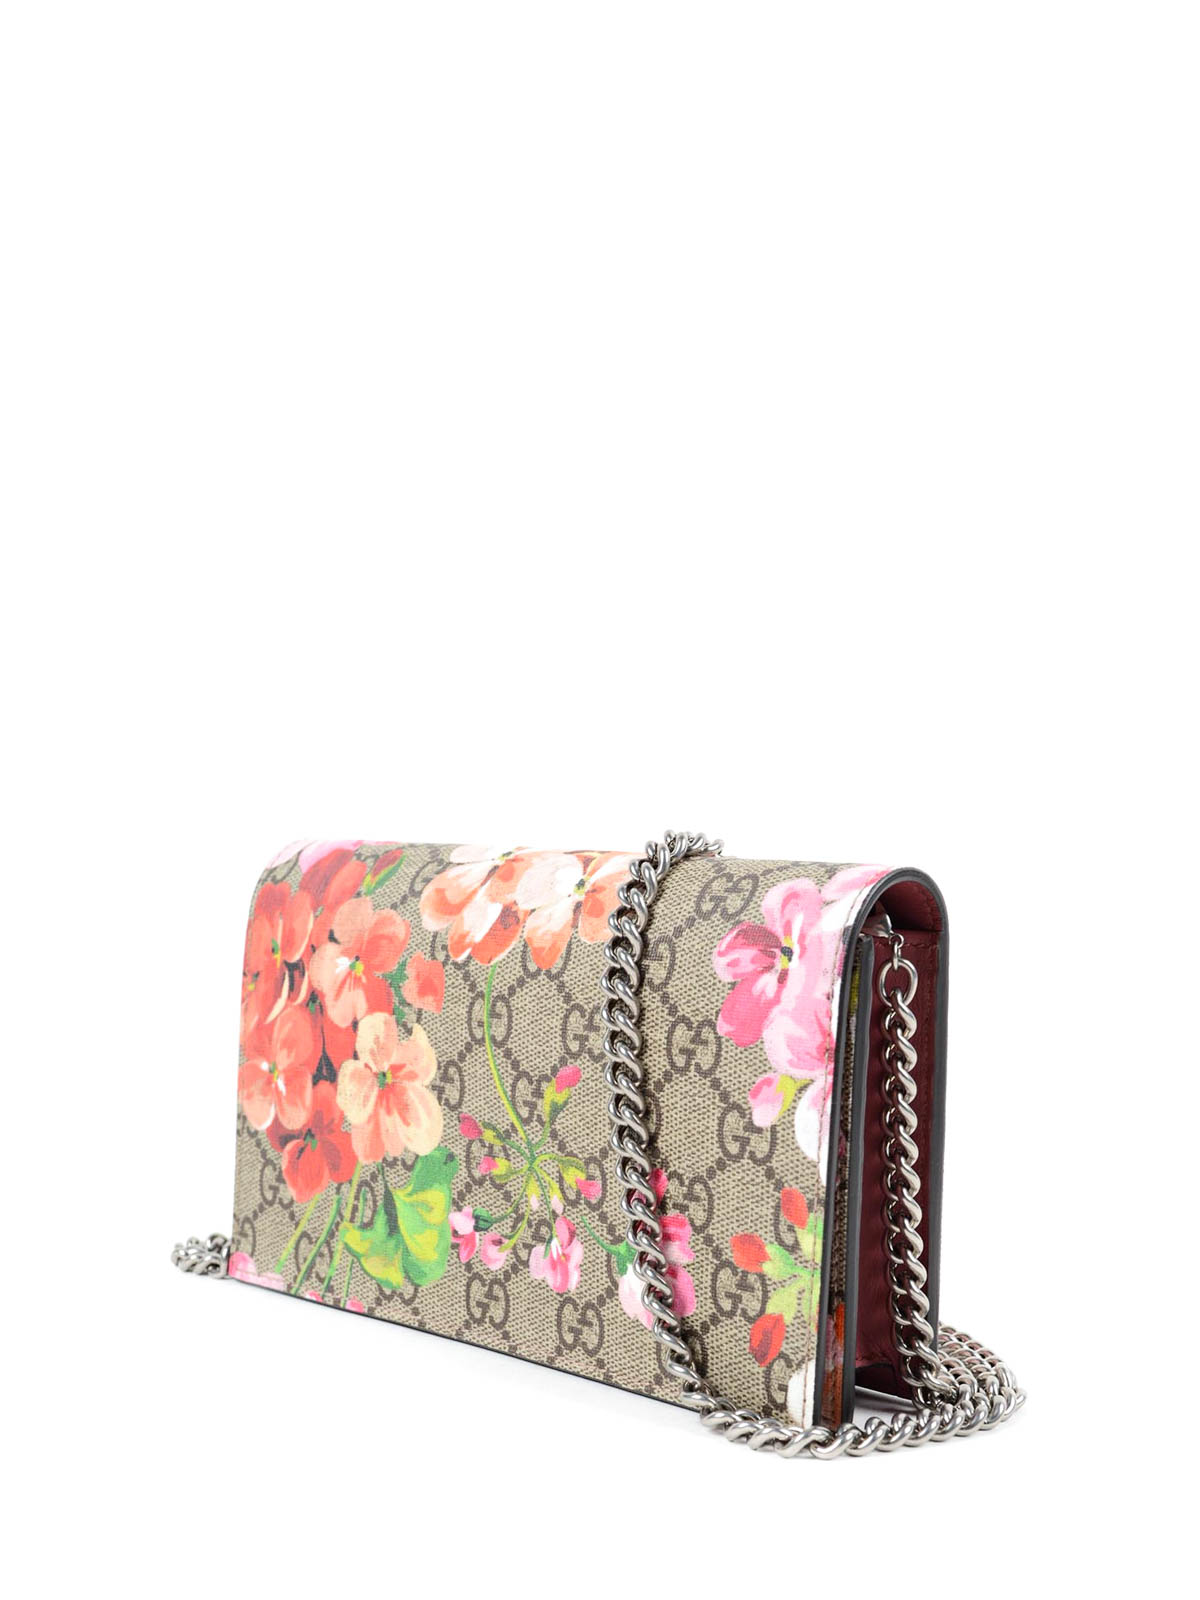 Bloom printed clutch by Gucci - clutches | iKRIX